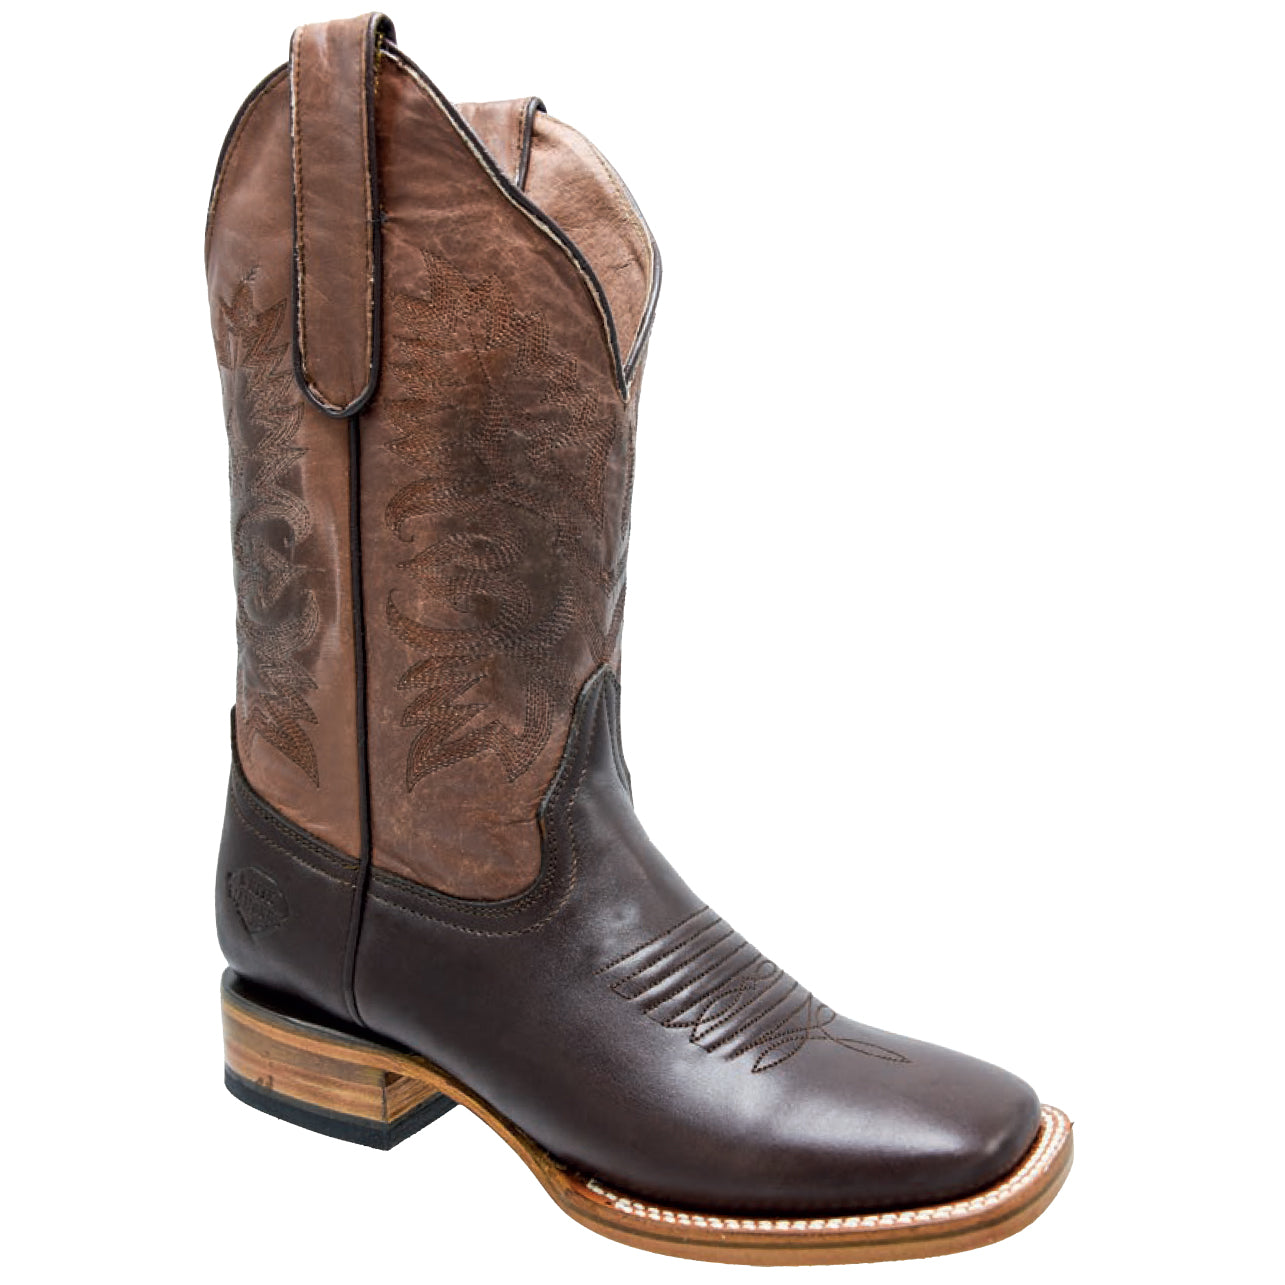 Brown Square Toe Cowgirl Boots